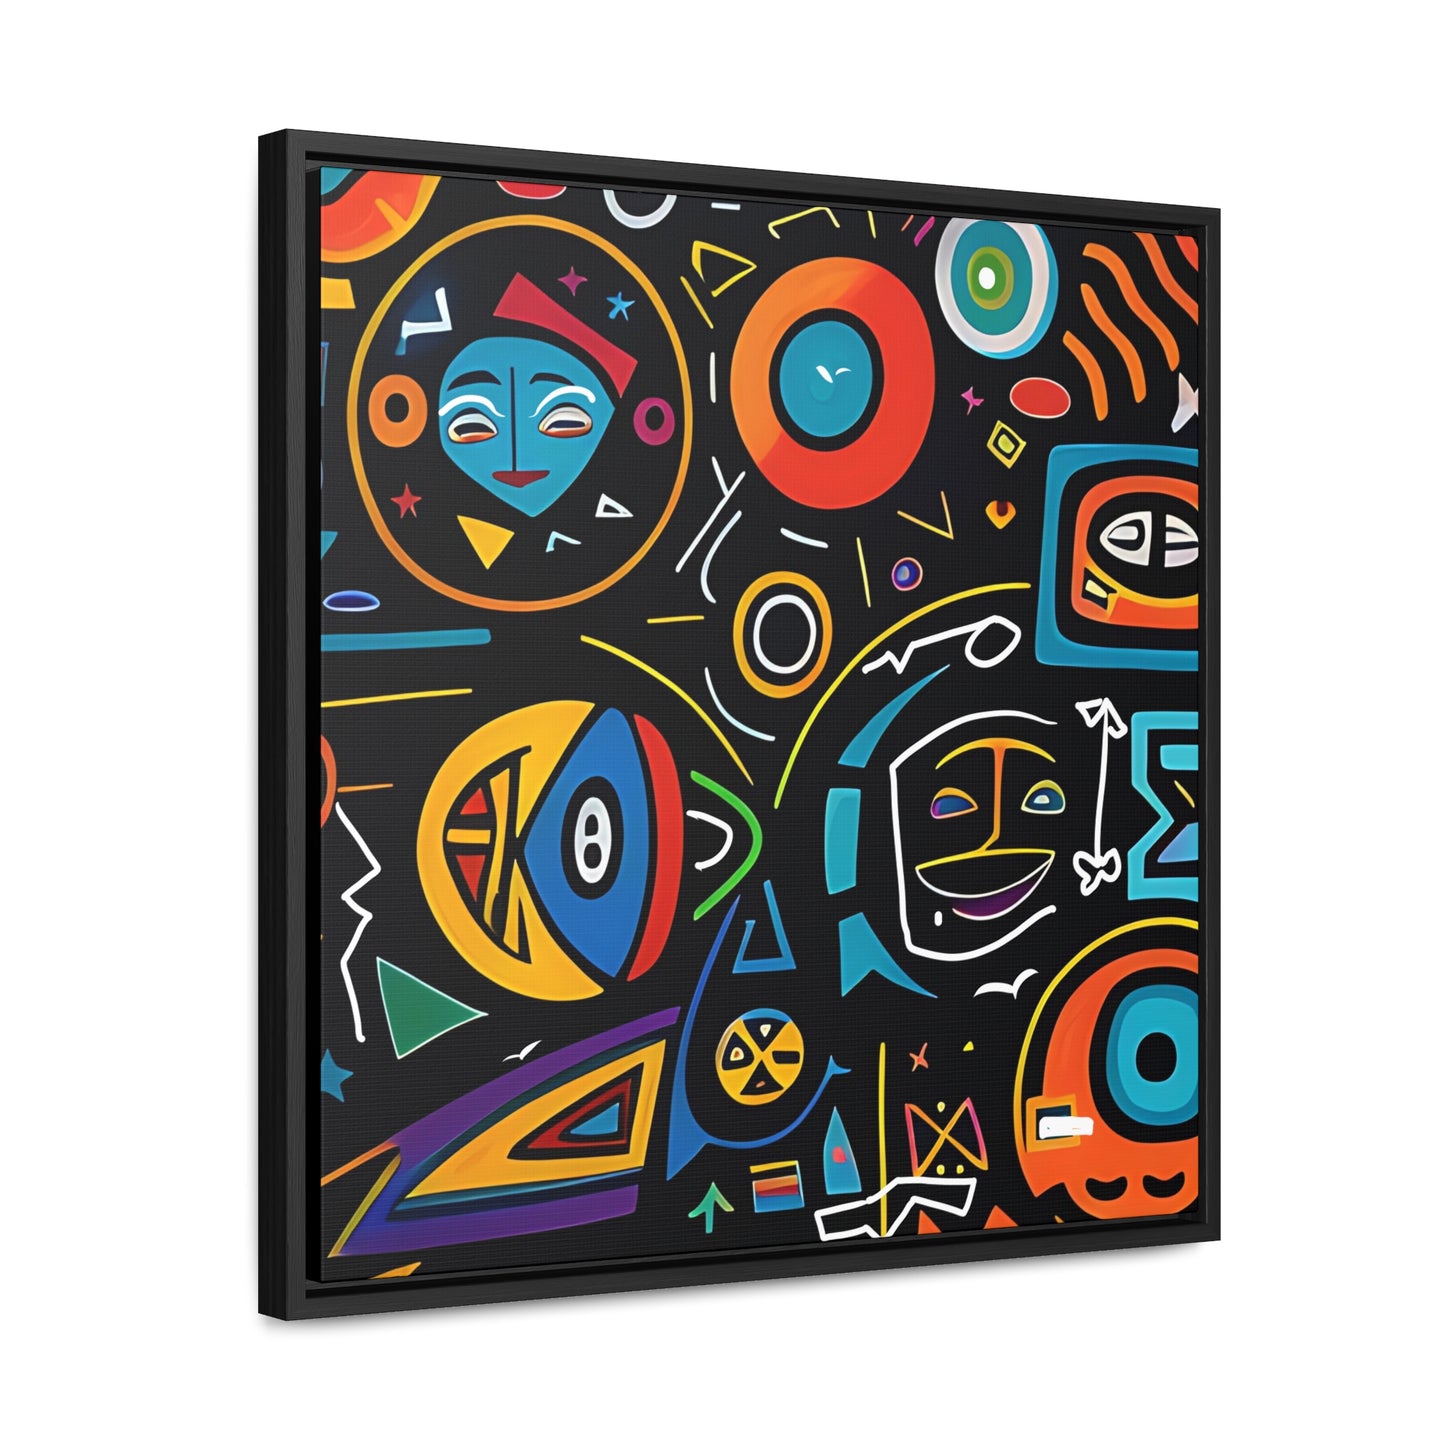 "Happy Smiles" Giclee Floater Framed Square Canvas Prints by Chris Thompkins - Collector's Edition -22 x 22 x 2 inches - Chris Thompkins